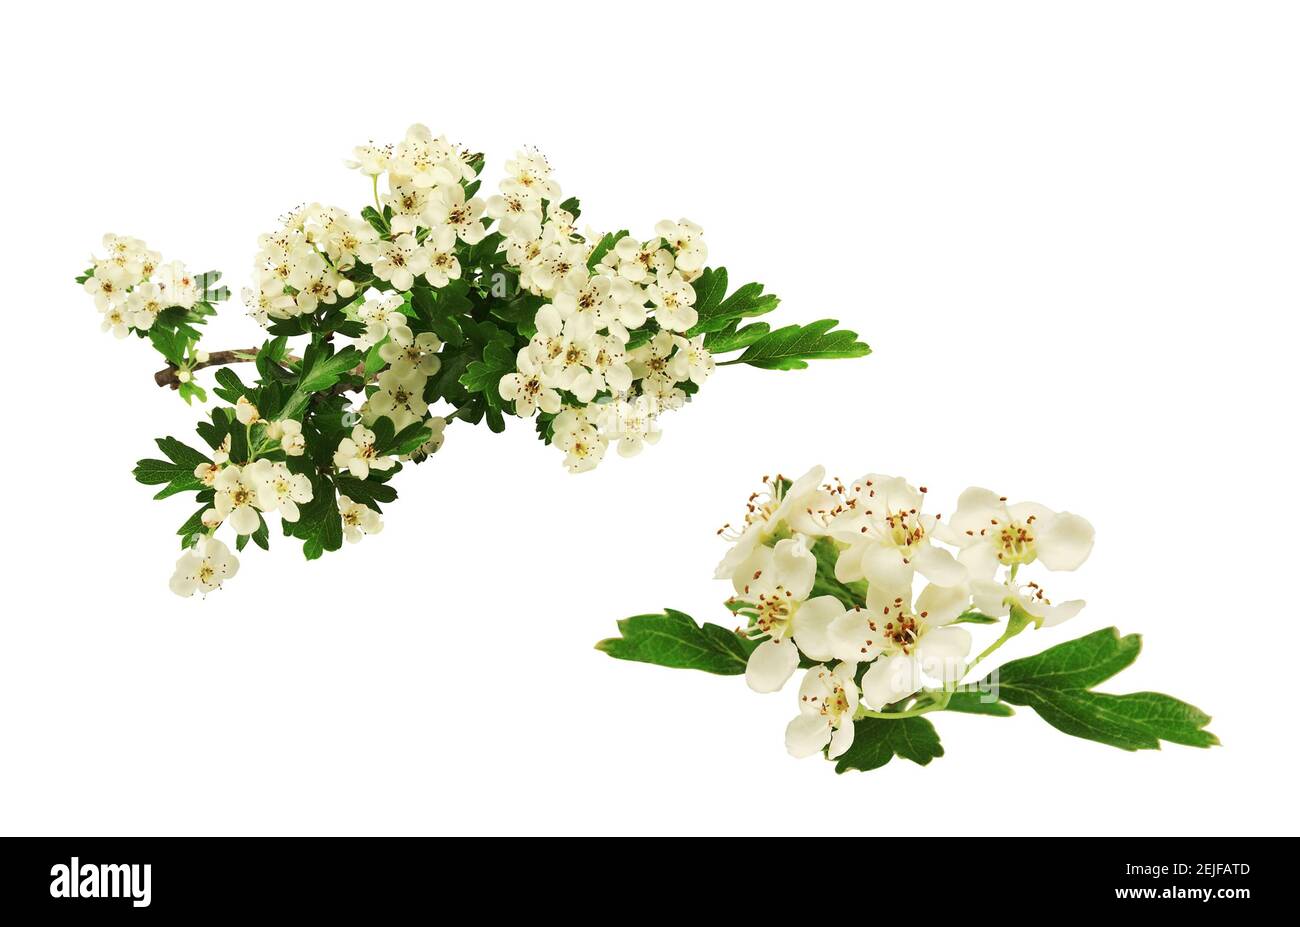 White hawthorn flowers in small bouquets, isolated on white background. Stock Photo